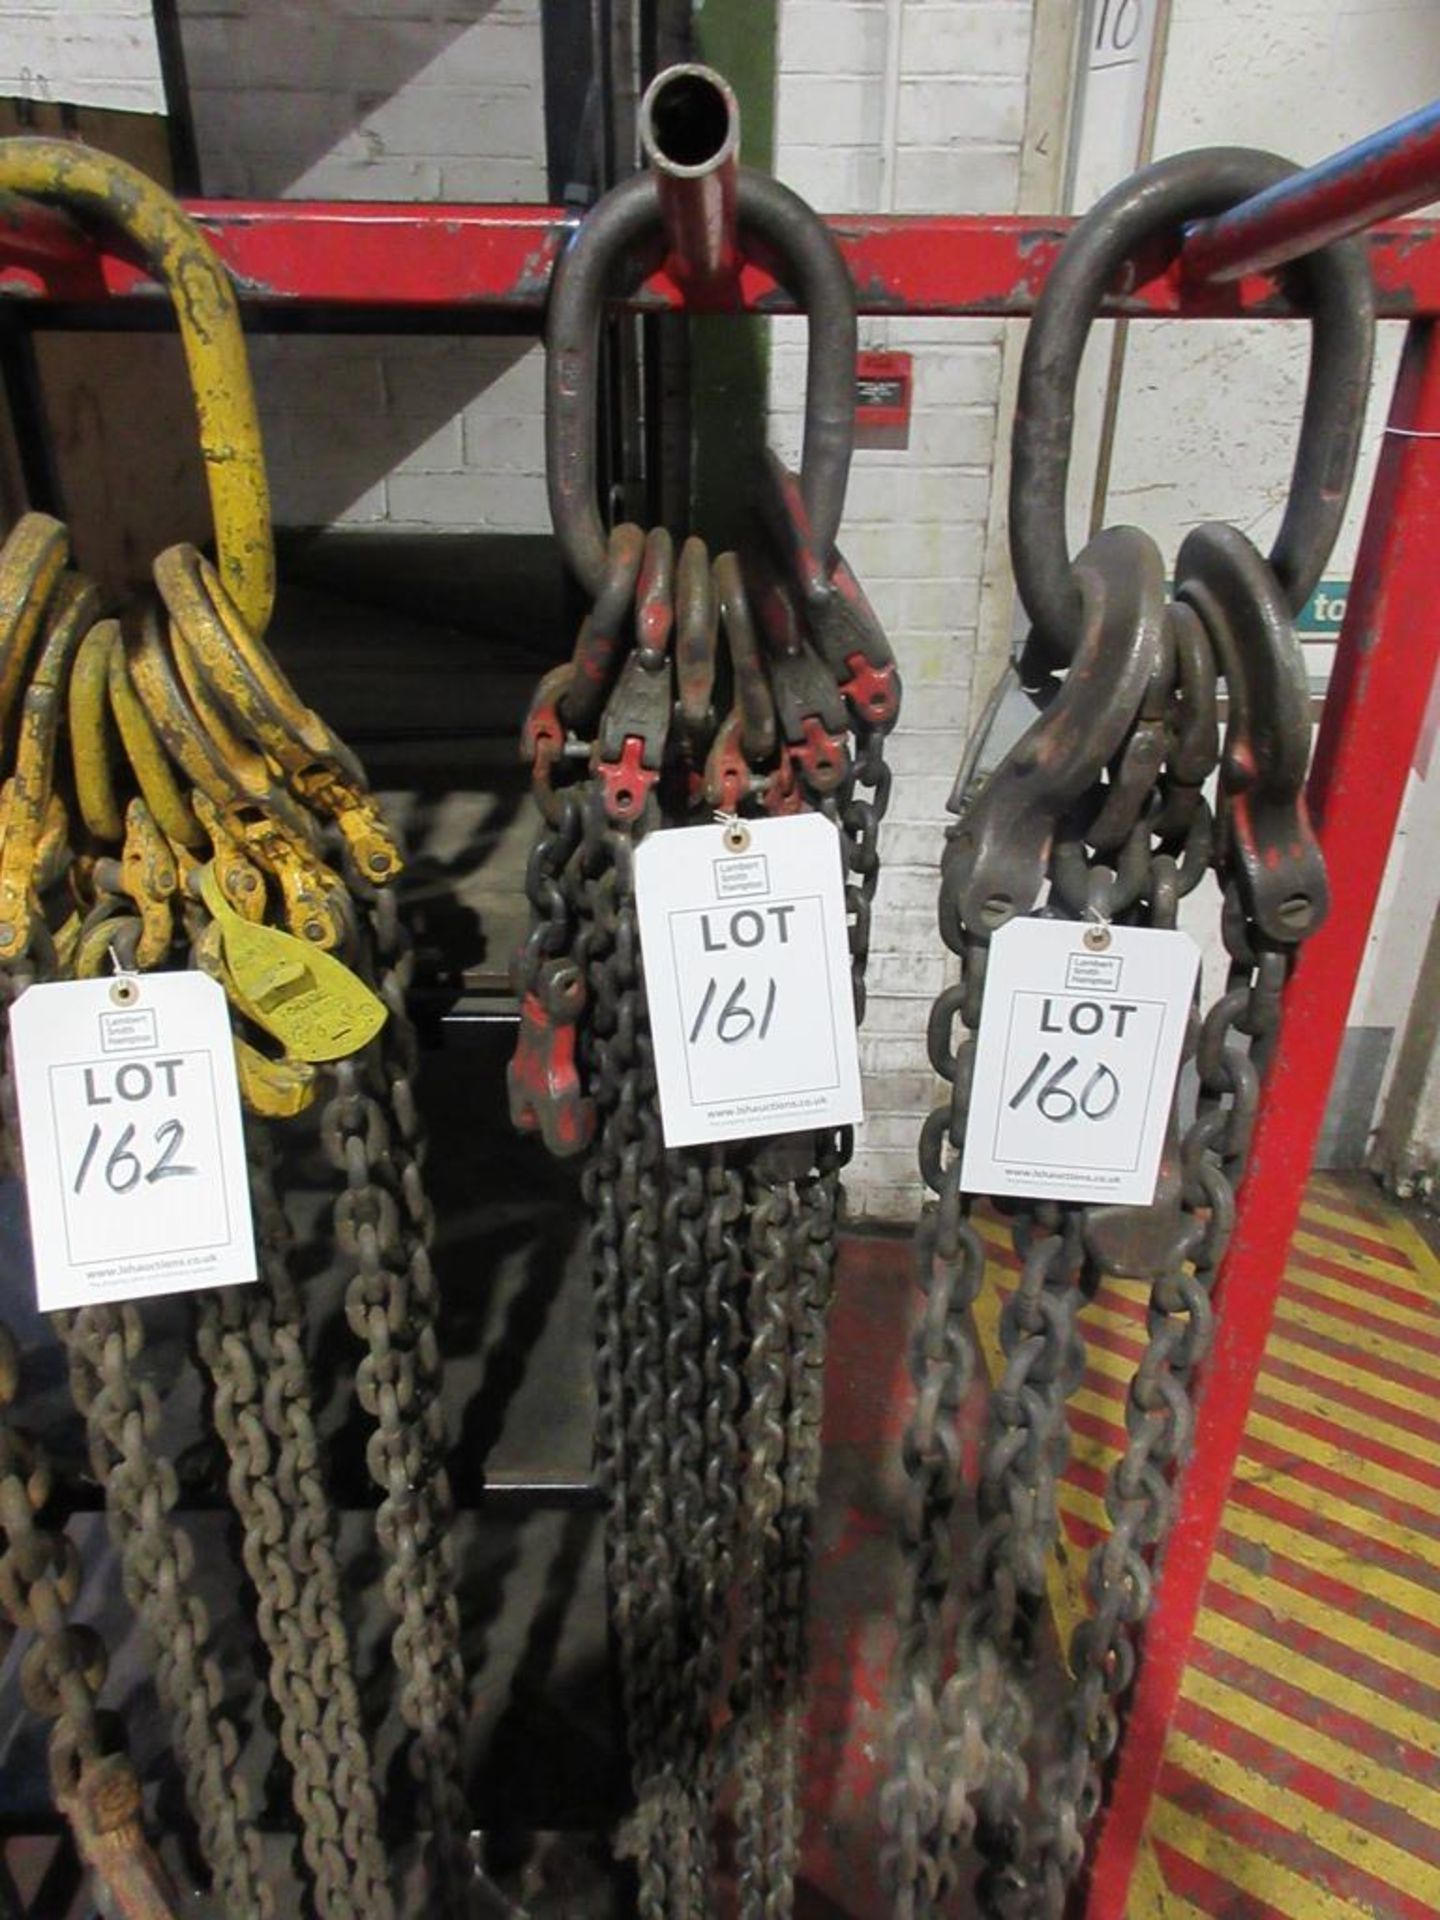 4 Leg lifting chain, with shorteners NB: This item has no record of Thorough Examination. The